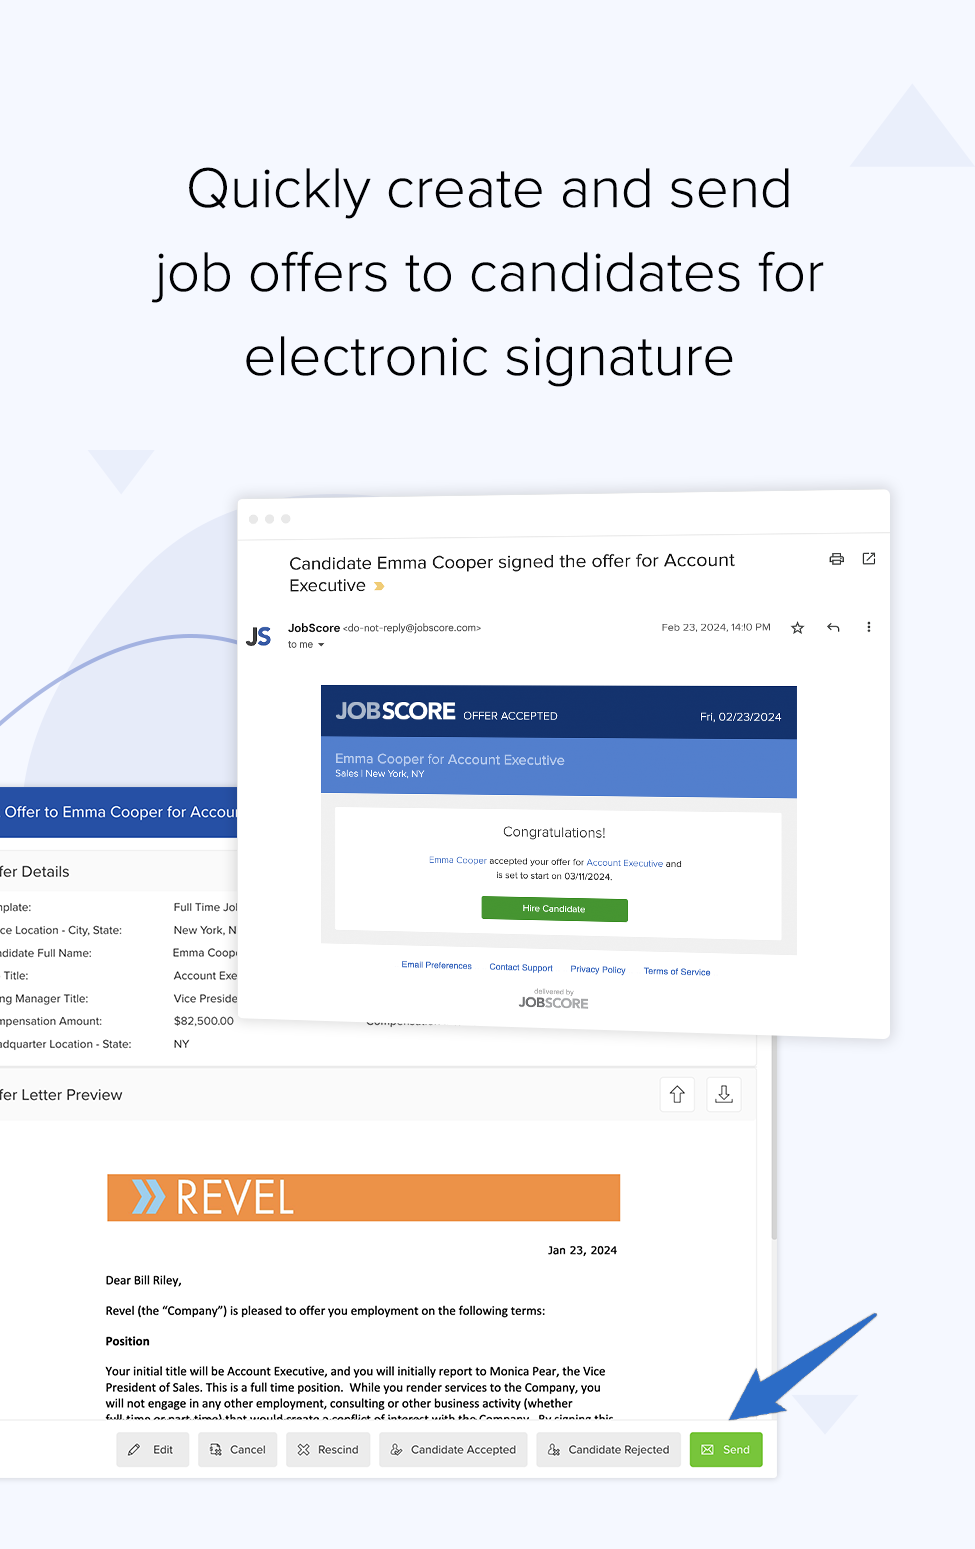 Quickly create and send job offers to candidates for electronic signature | mobile recruiting software offers